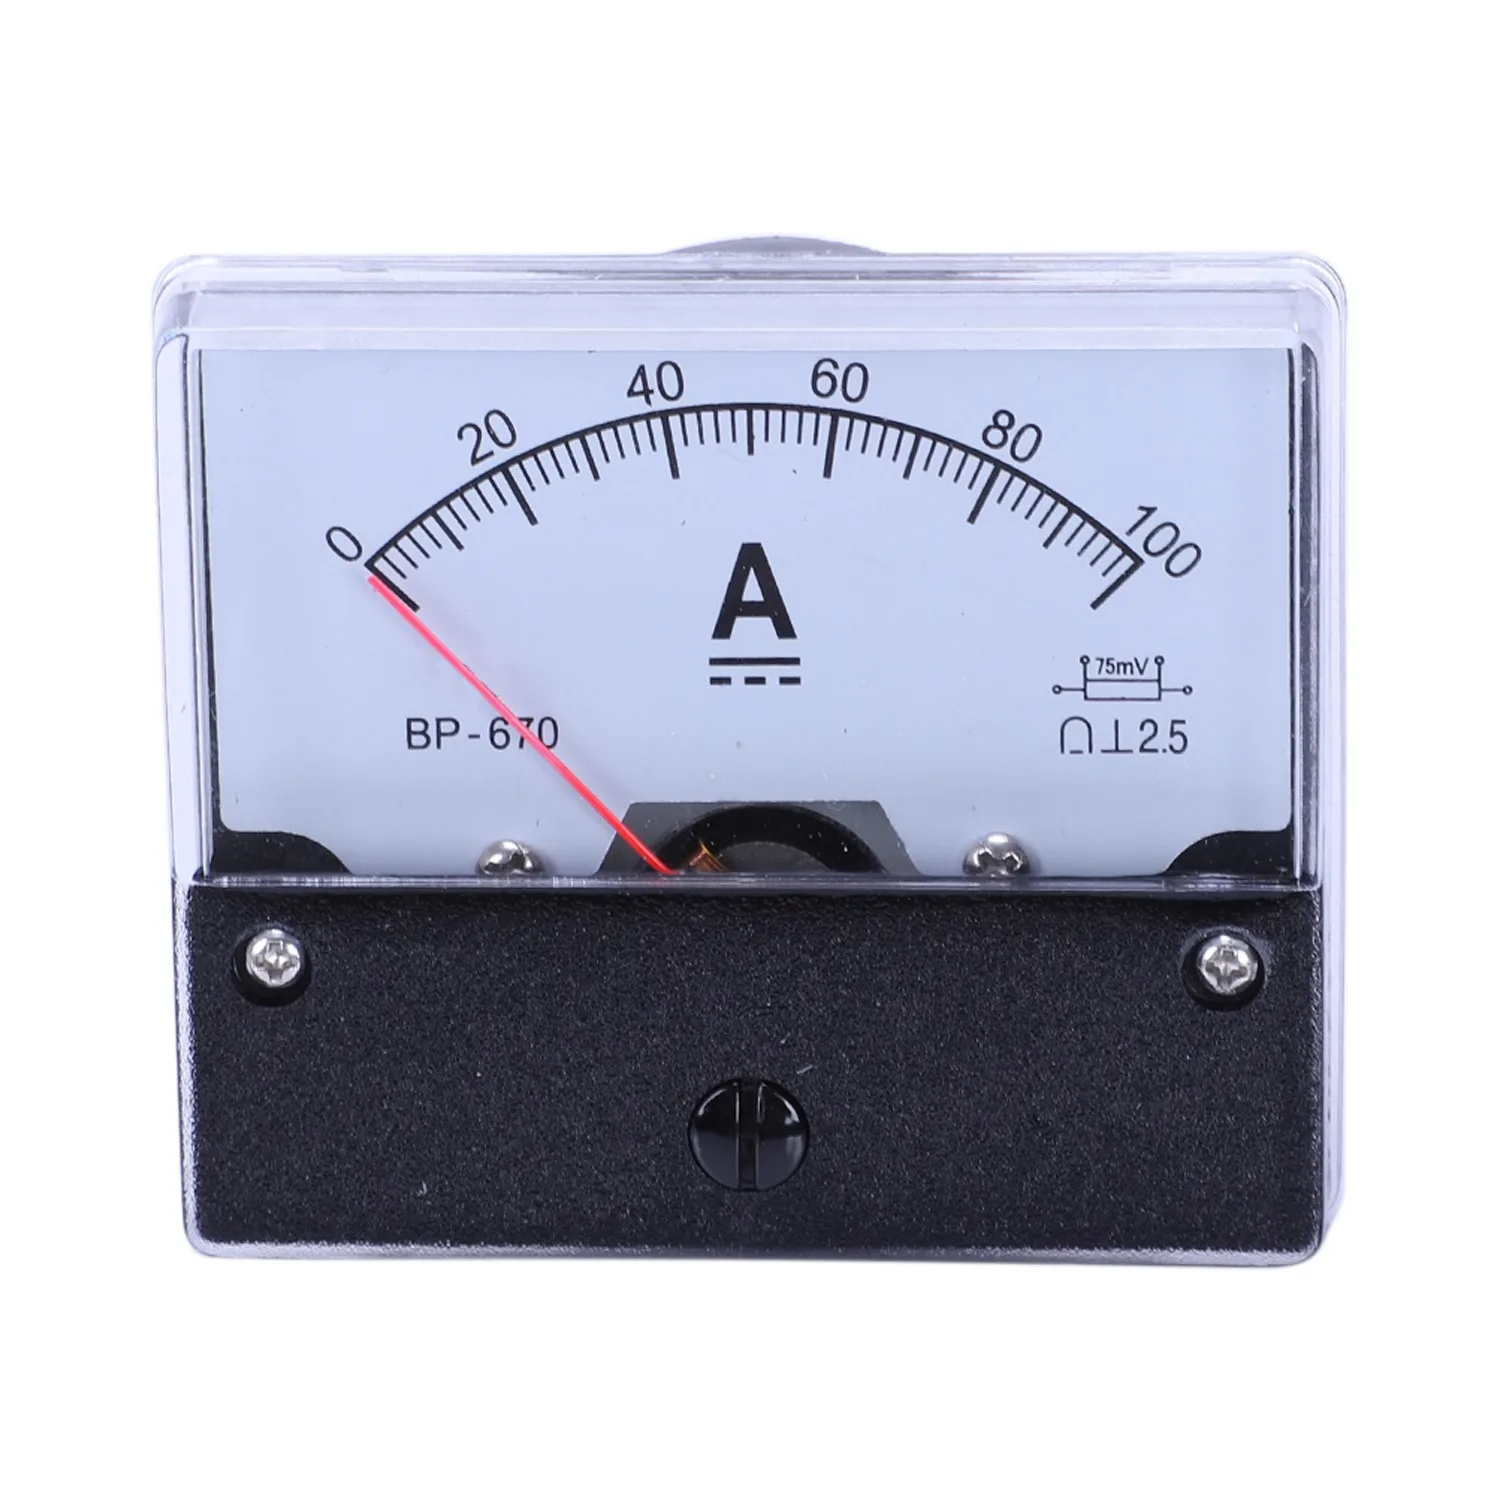 

DC 100A Analog Panel Ampere Current Counter Ammeter Meter